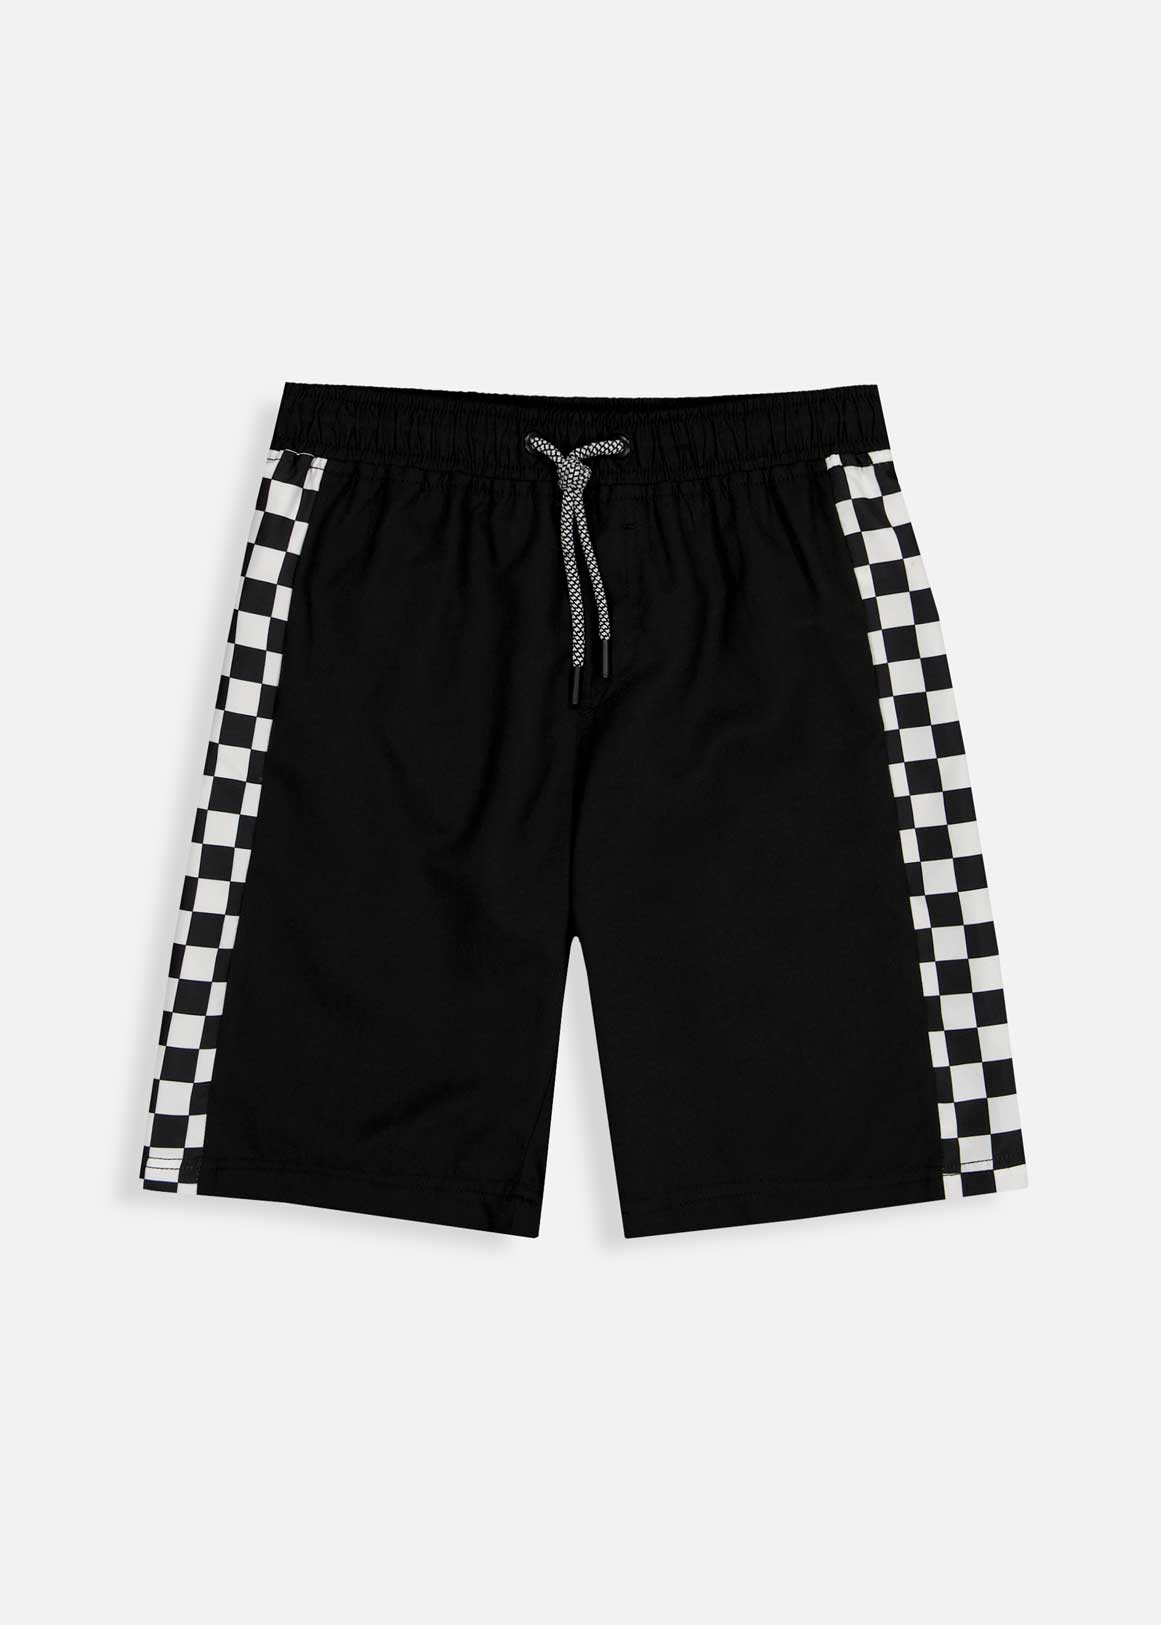 BLACK CHECKERBOARD S - Woolworths Mauritius Online